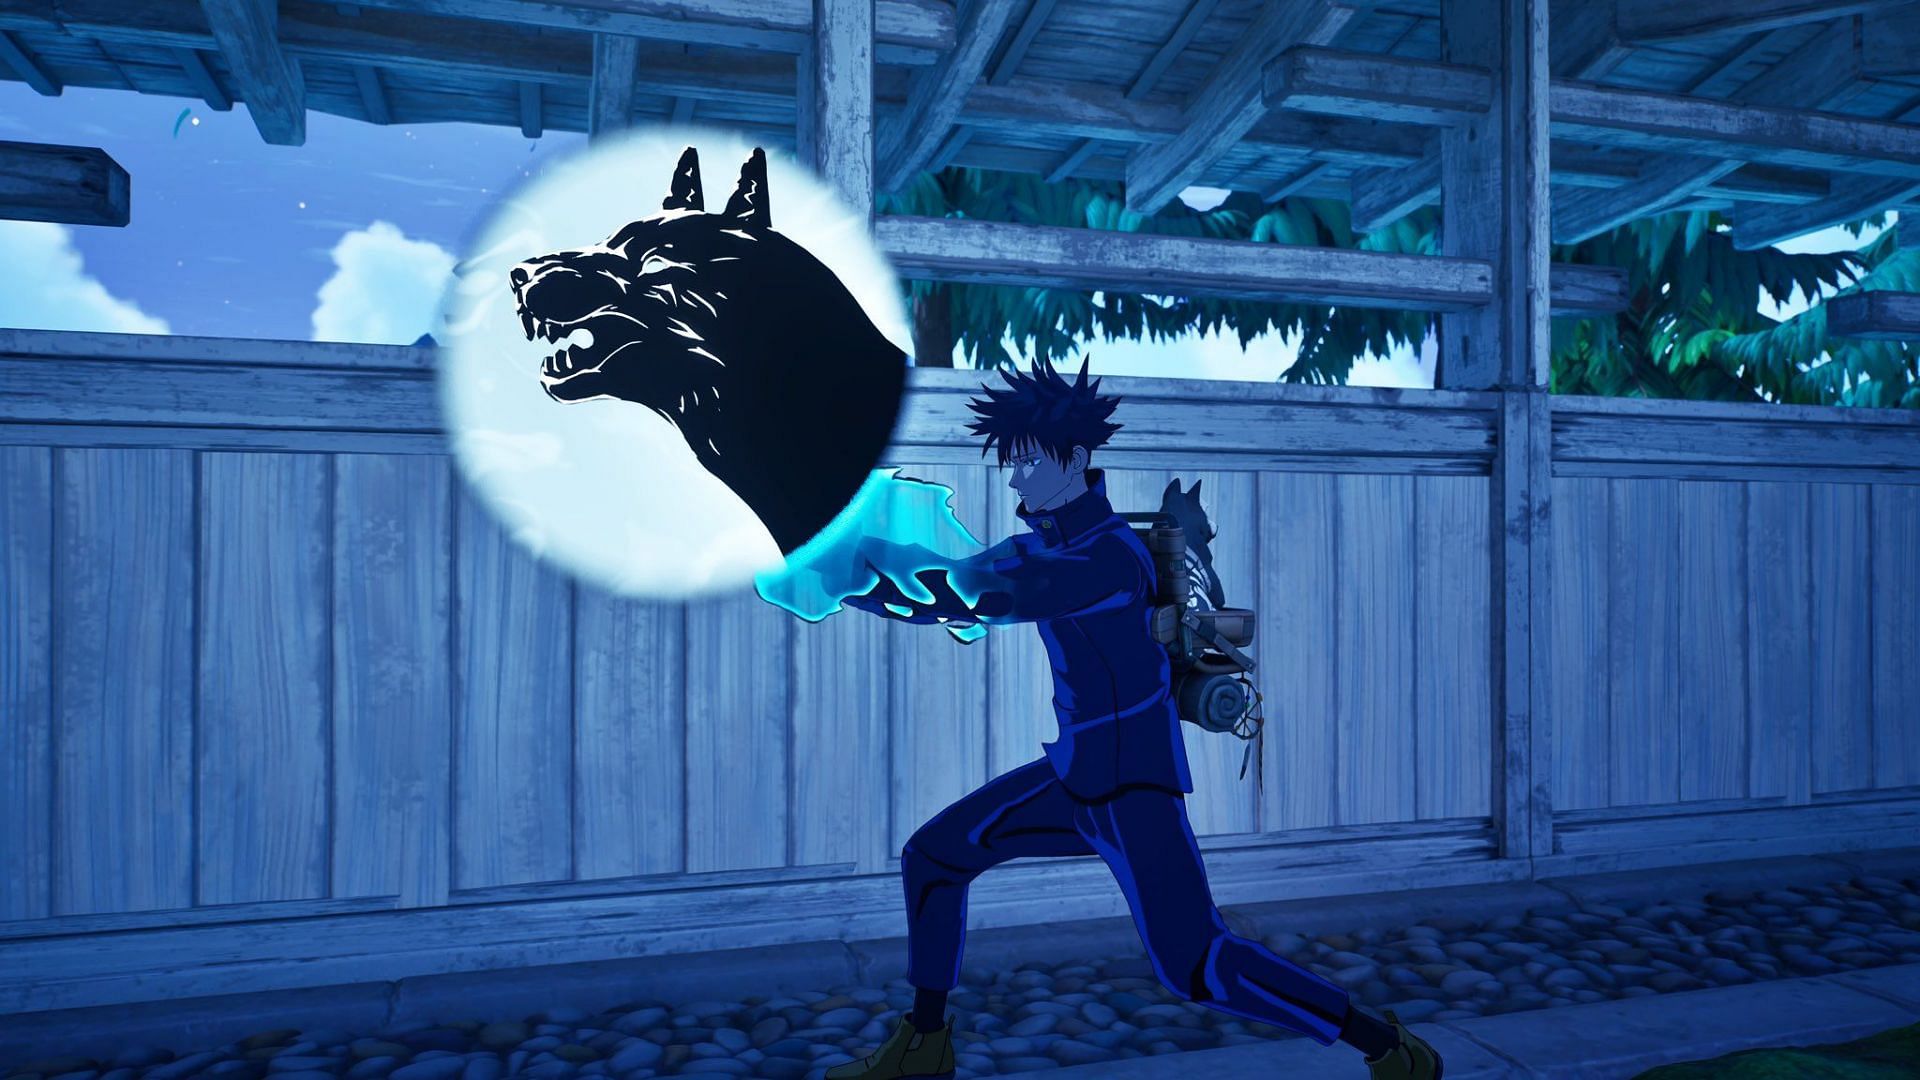 How to get Jujutsu Kaisen skins in Fortnite (Image via Epic Games/Fortnite||X/GoldenTheCube)